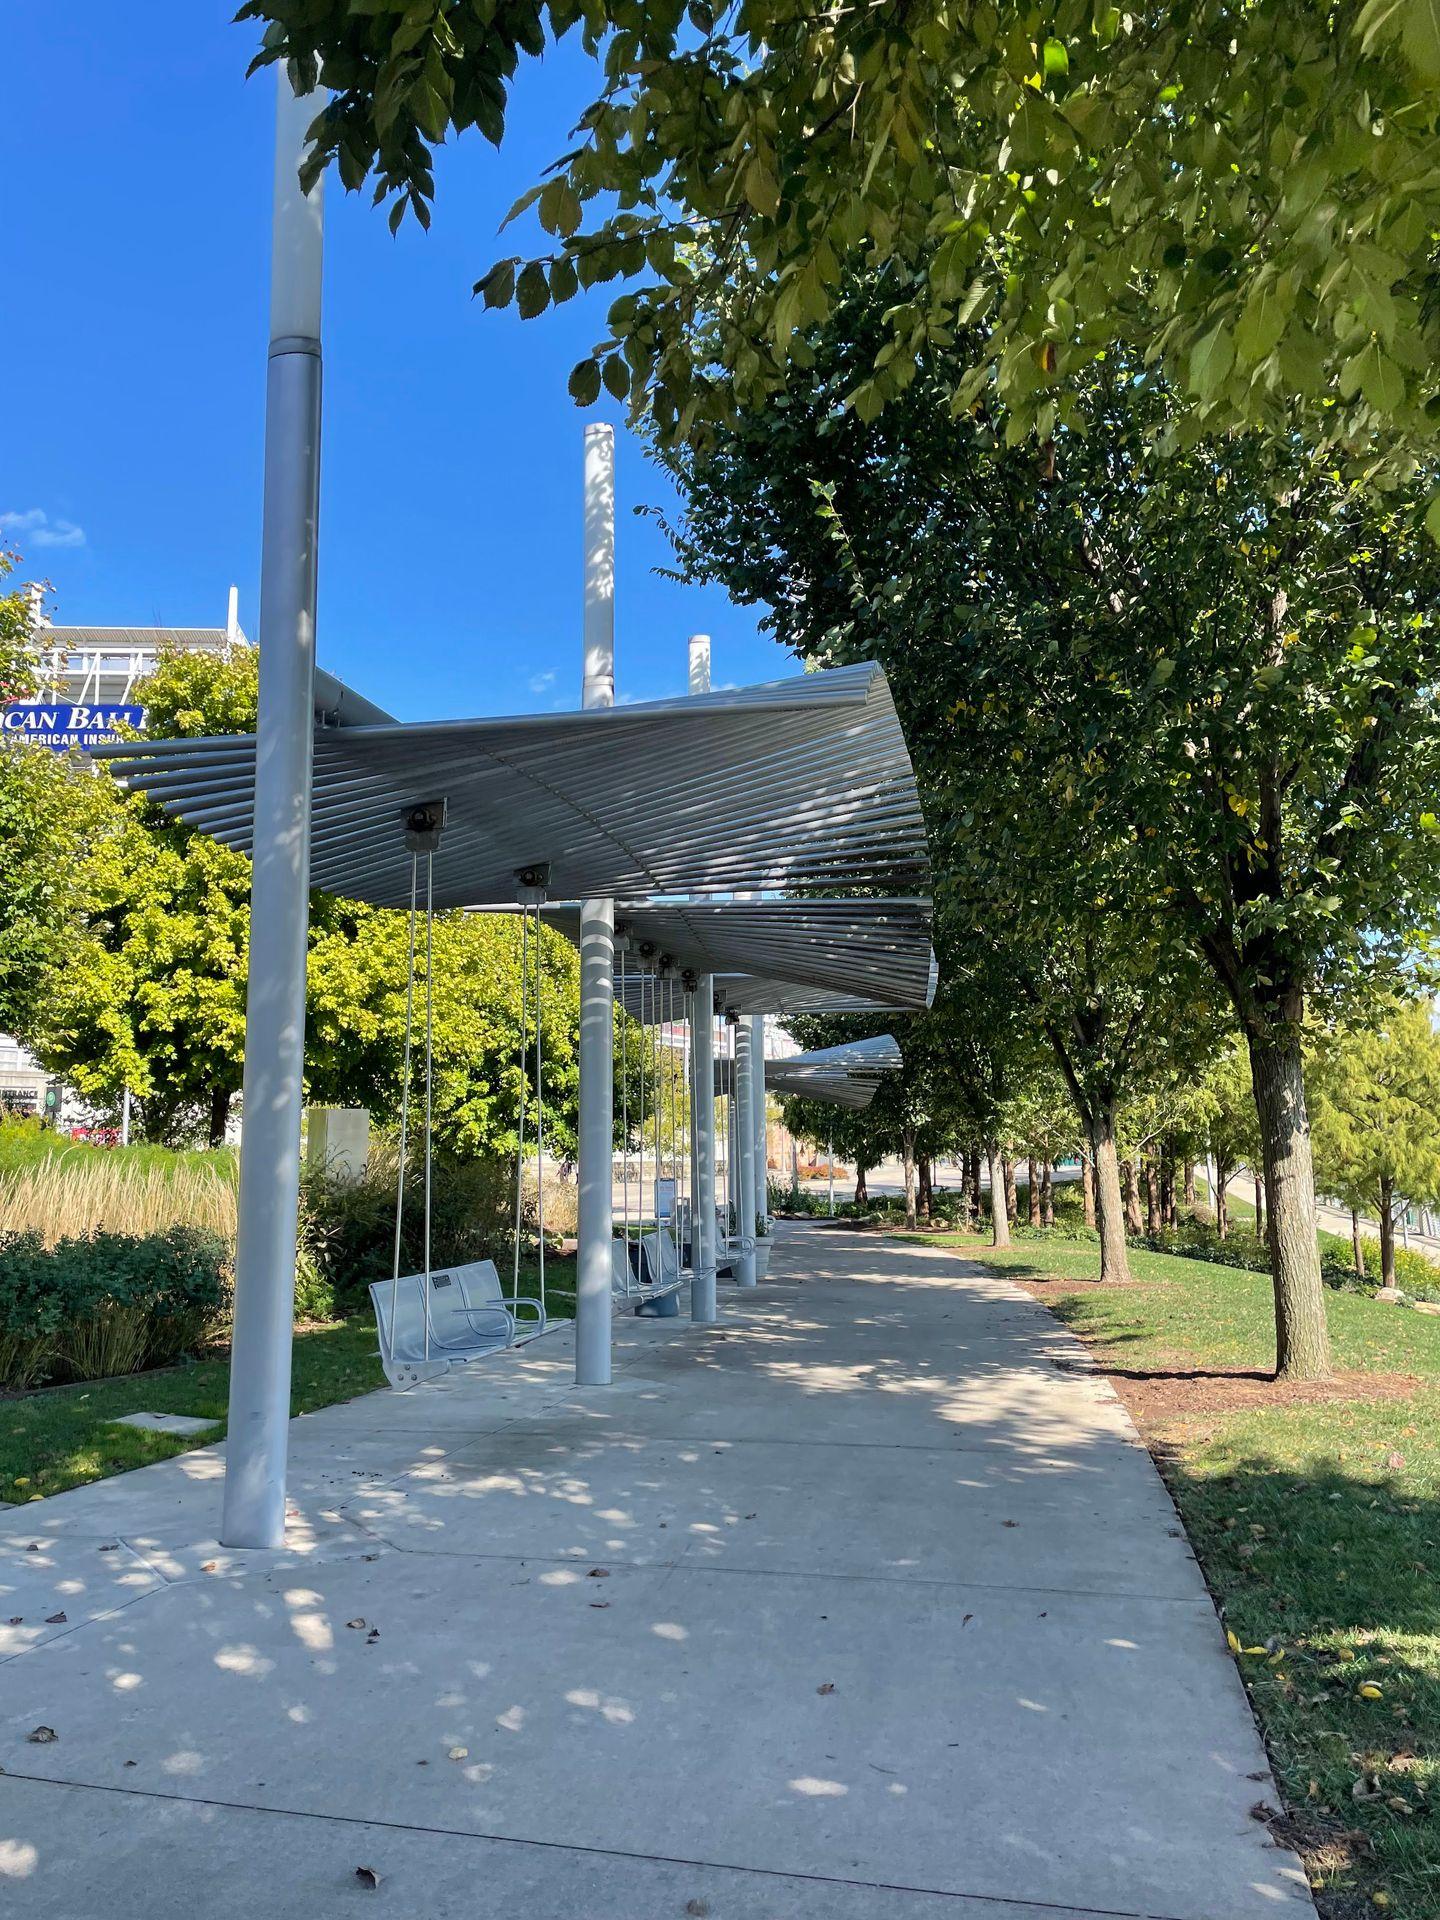 Swinging benches at Smale Riverfront Park